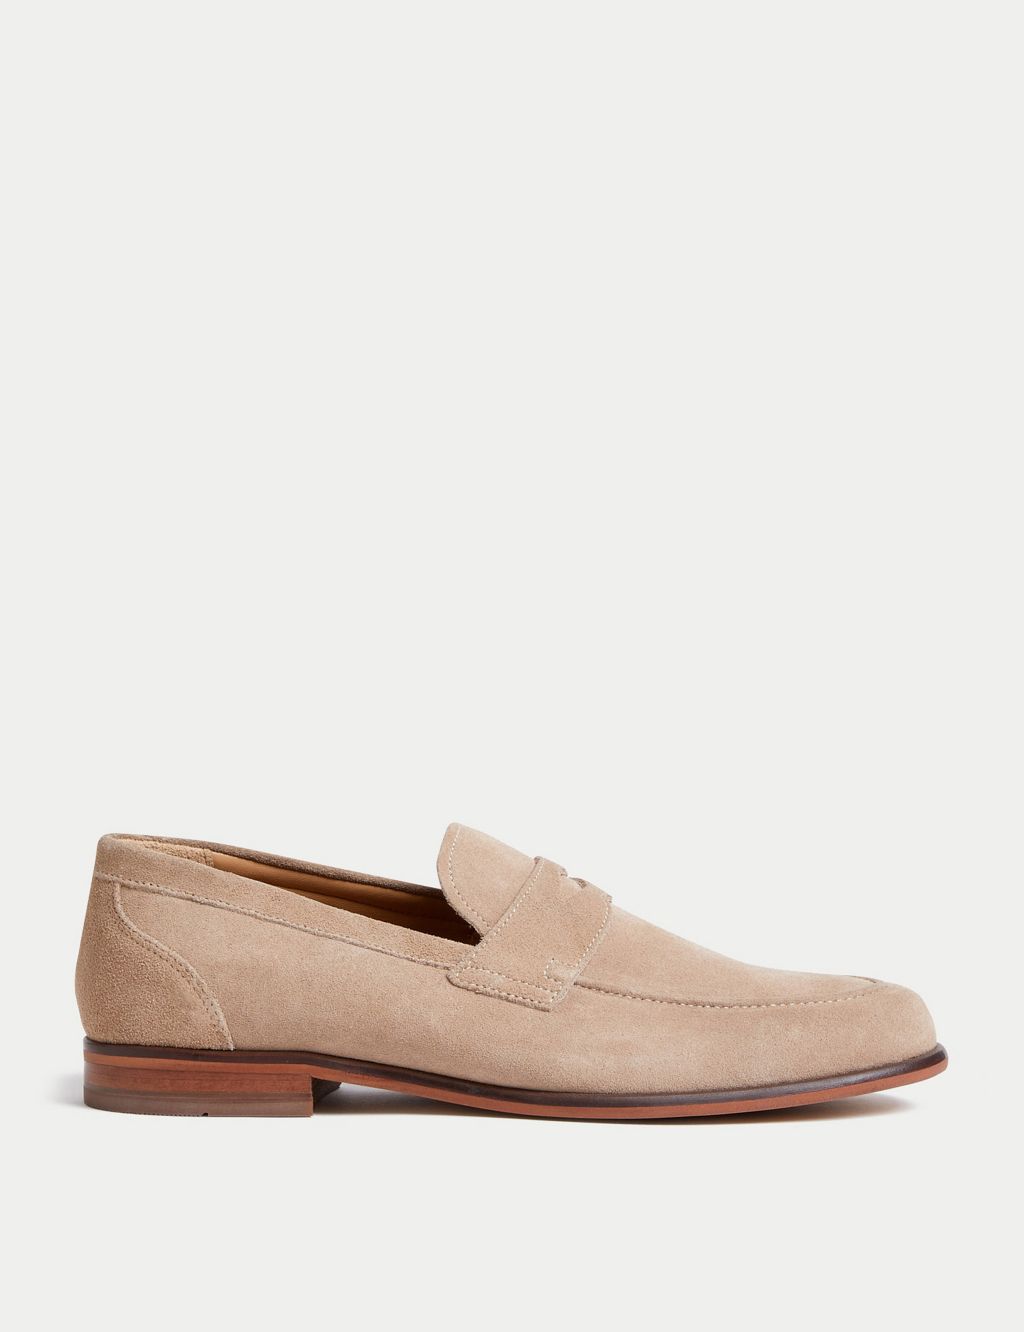 Suede Stain Resistant Slip-On Loafers image 1